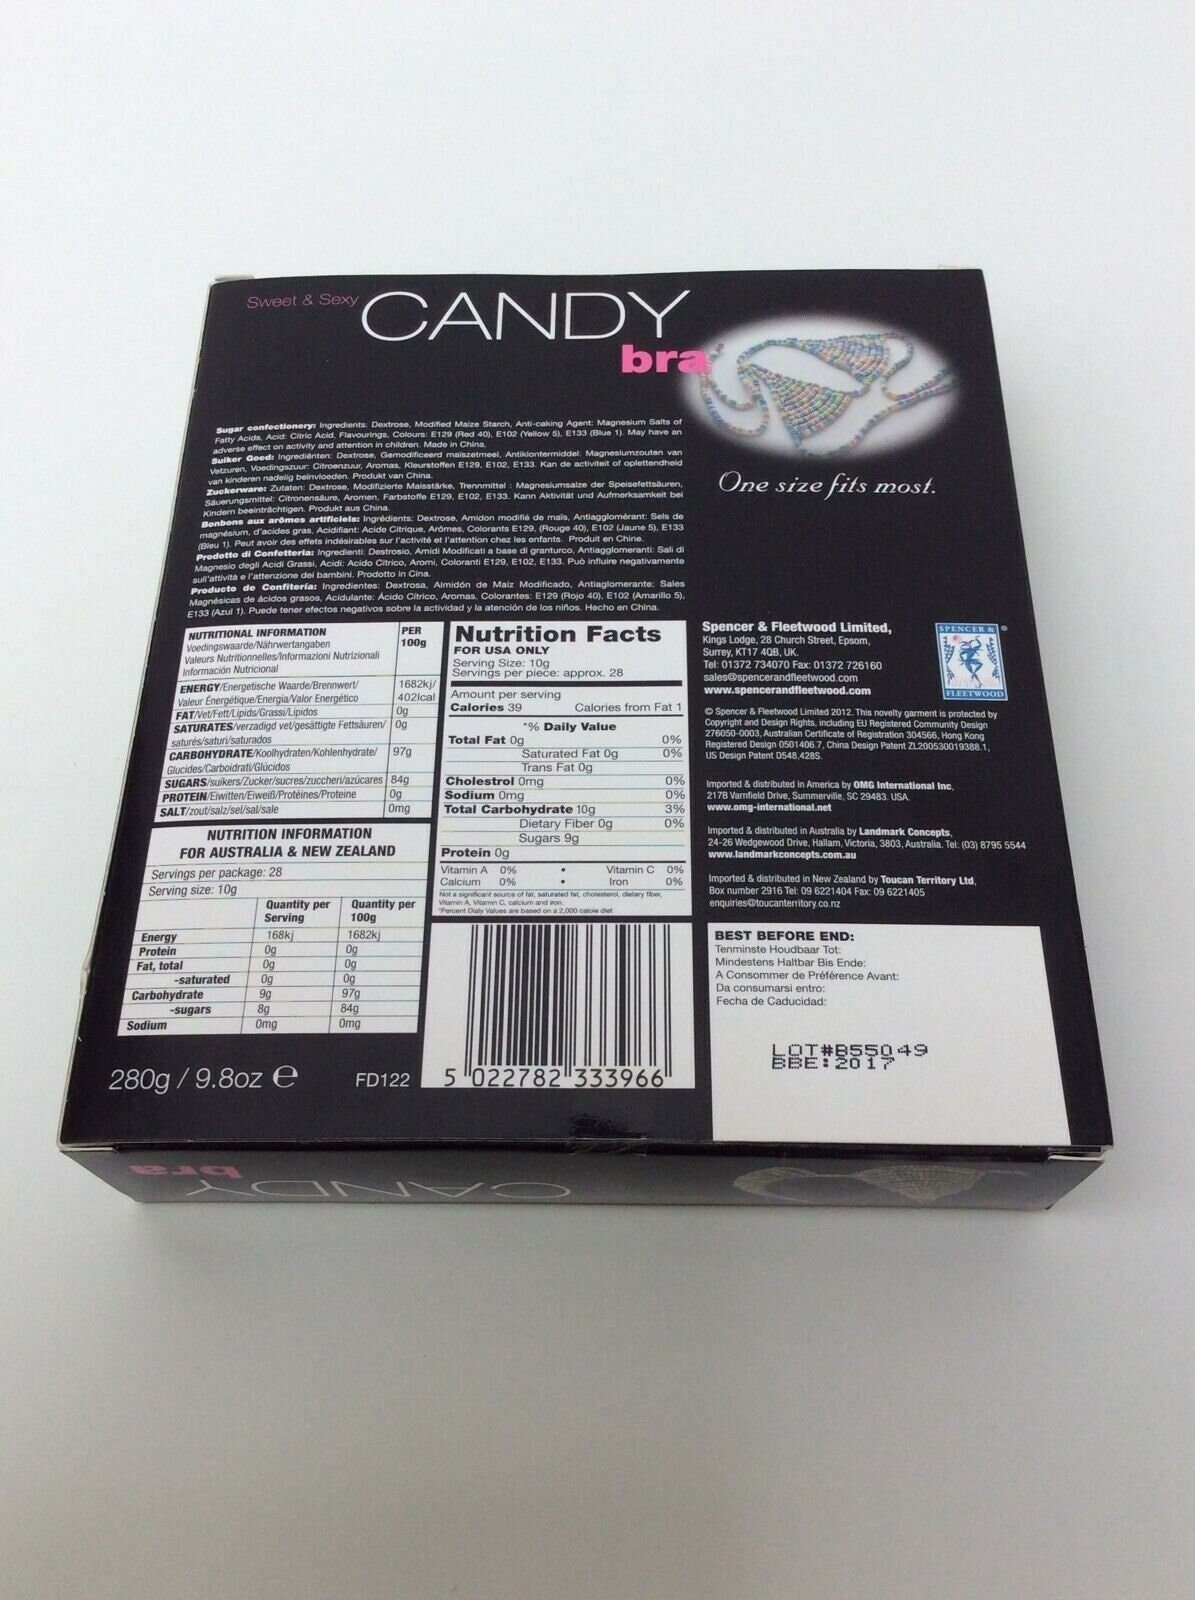 Candy Bra Sweet and Sexy Edible Underwear in Sealed Box UK SELLER Same Day  Dispatch and Free Delivery -  Canada